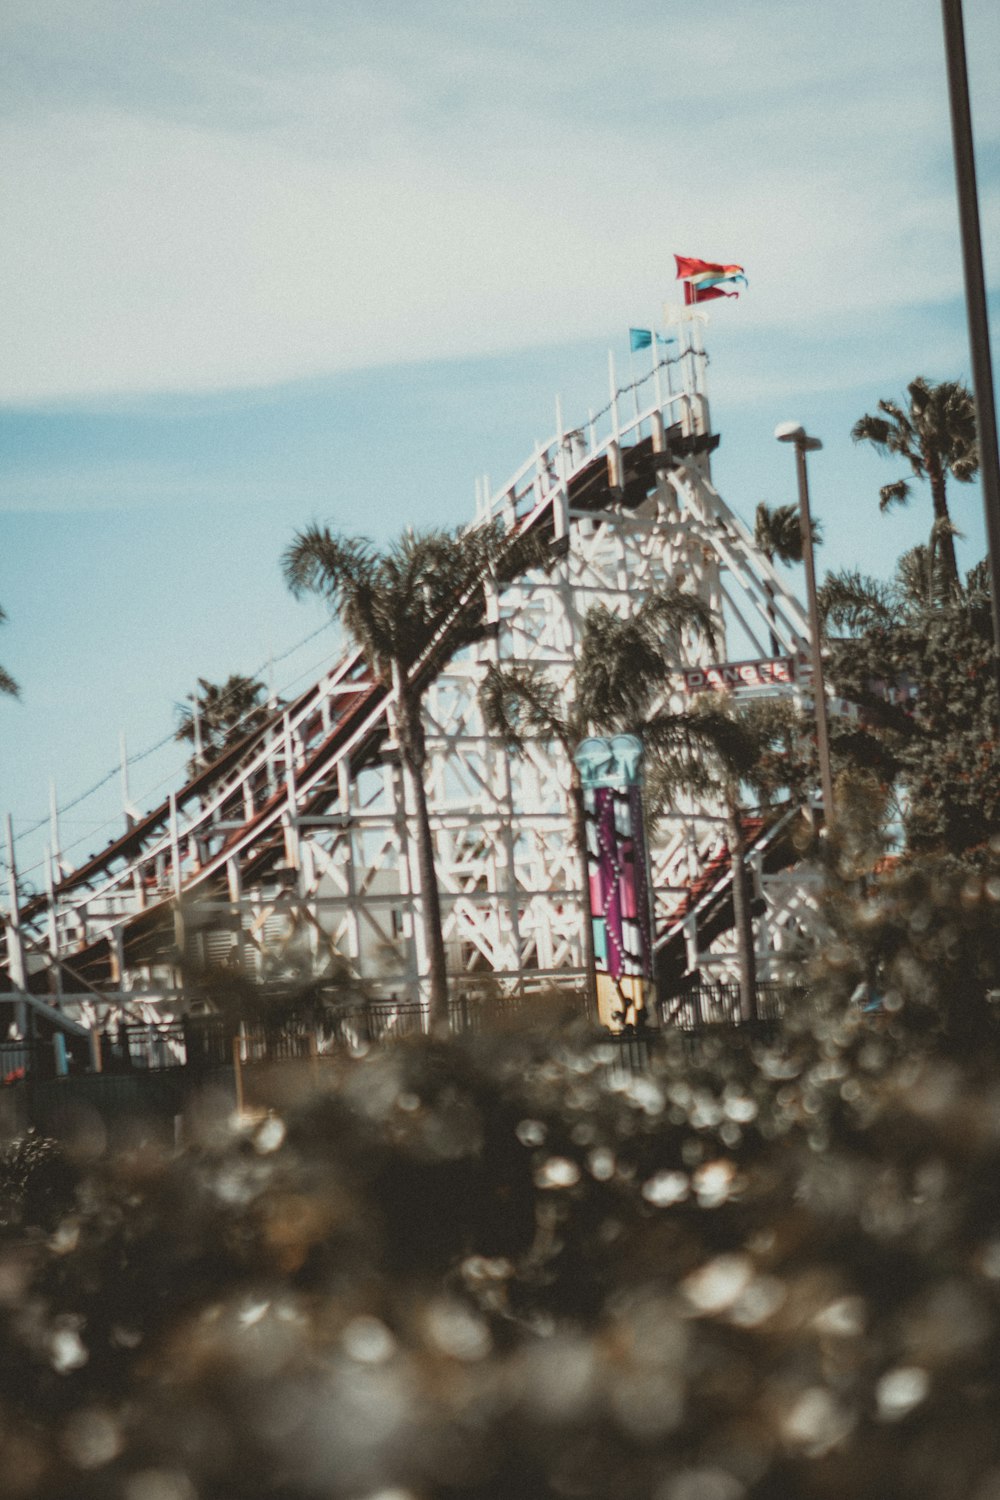 people riding on roller coaster during daytime